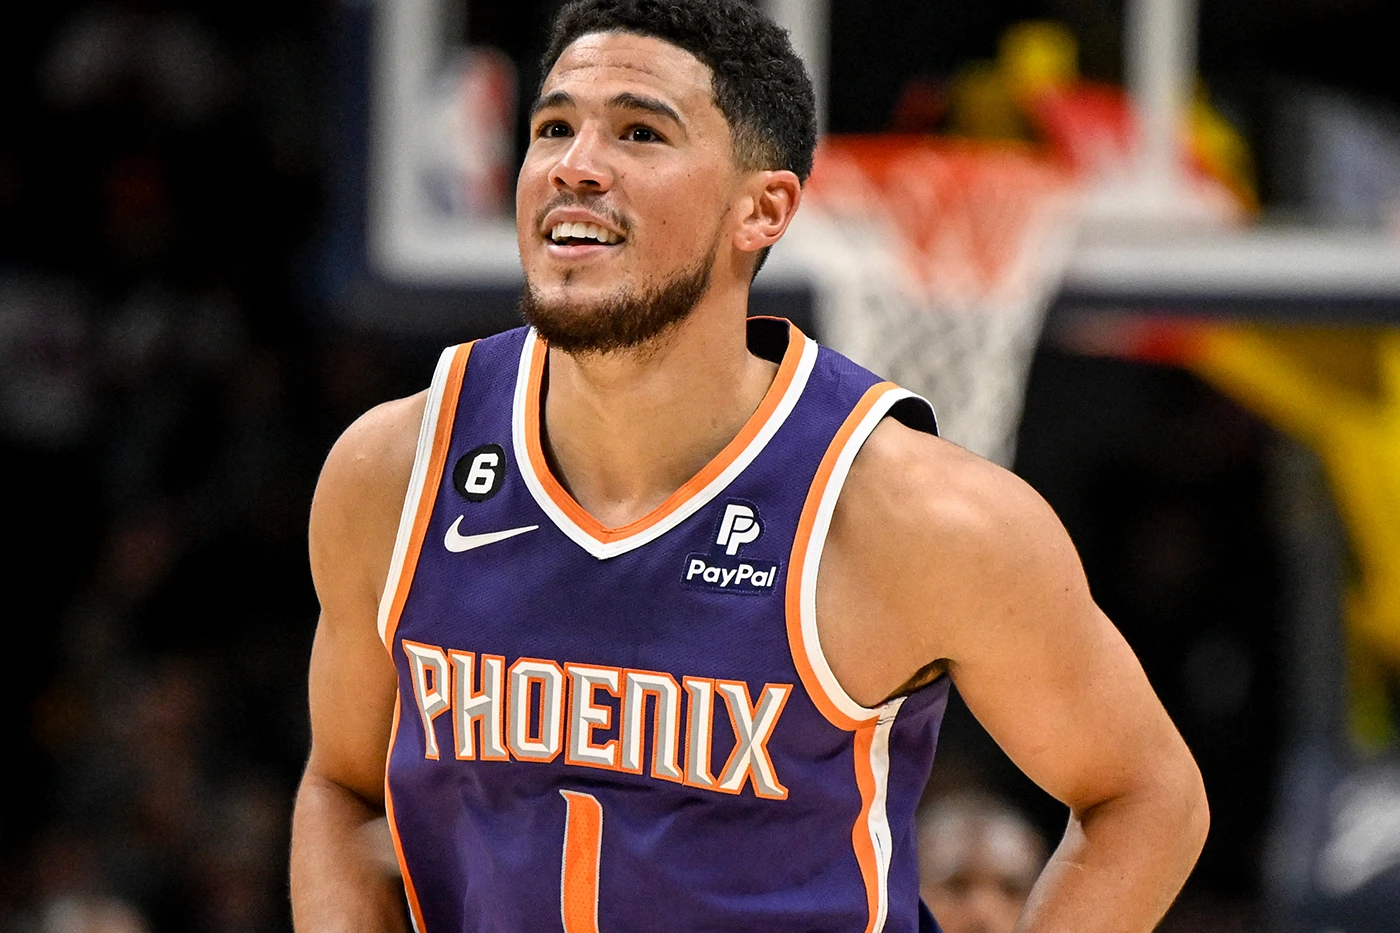 The Phoenix Suns' Thrilling Triumph A Closer Look at Their Seventh Consecutive Win